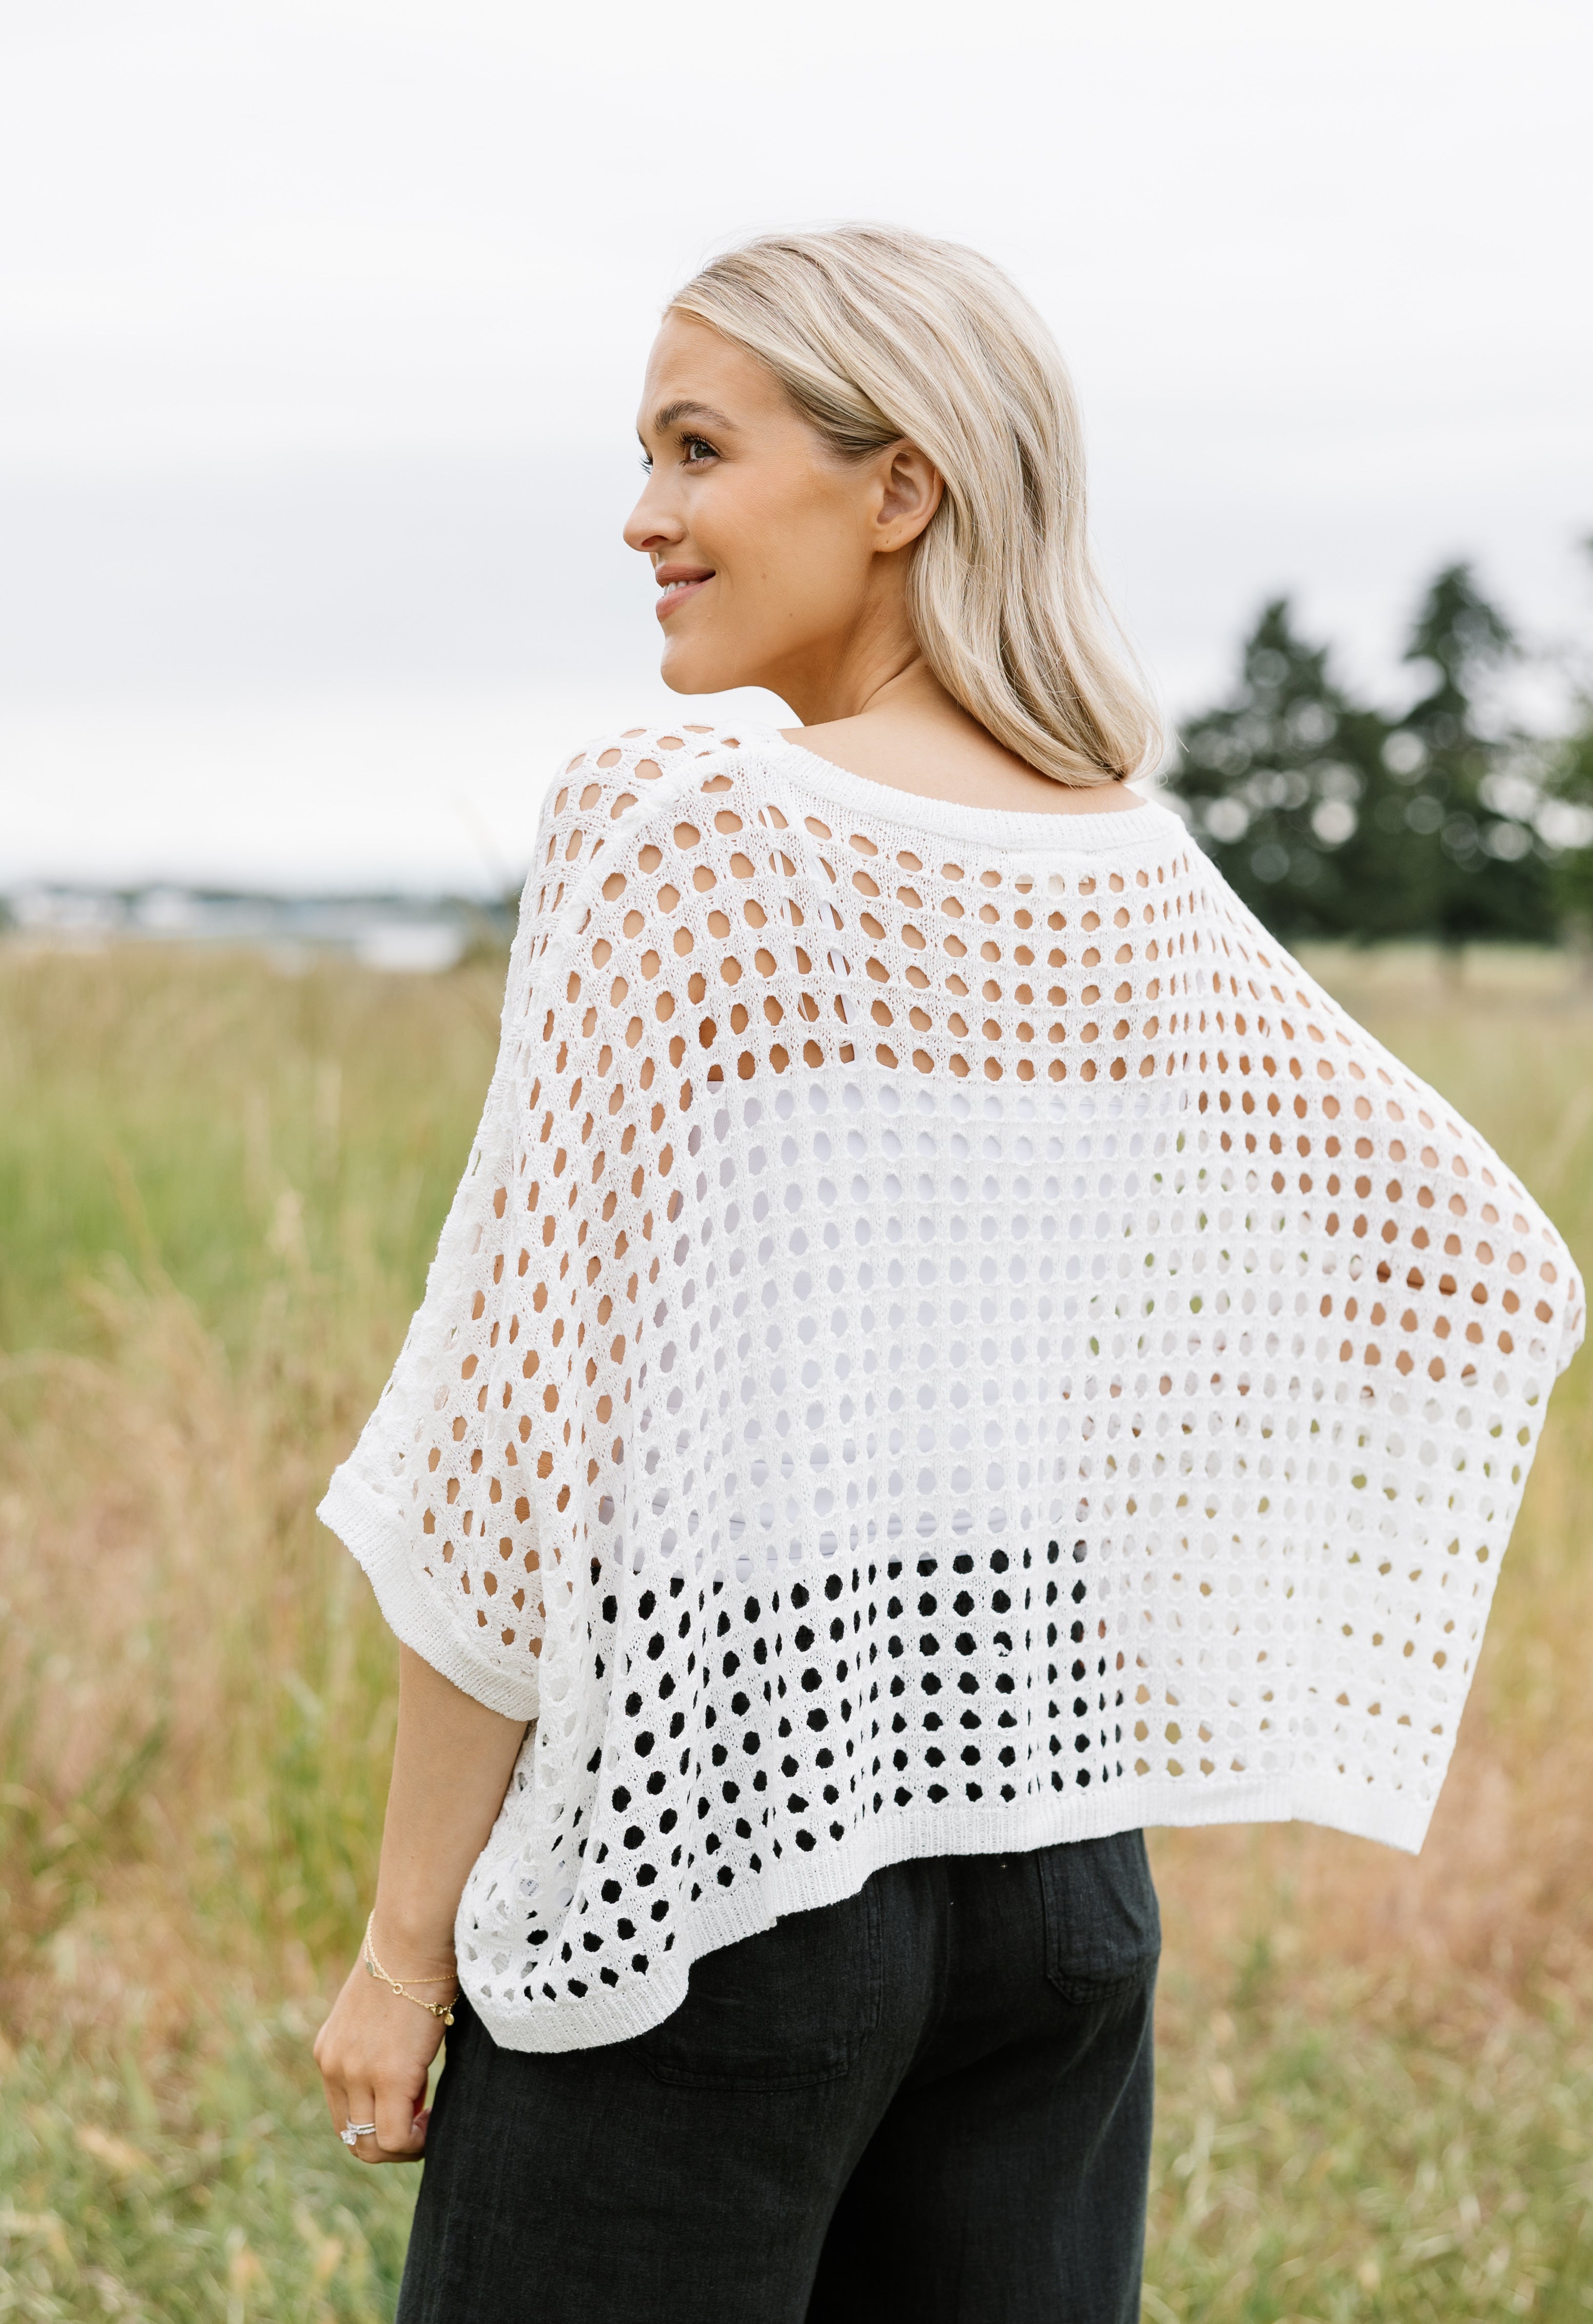 Daylight Sweater - OFF WHITE - willows clothing SWEATER